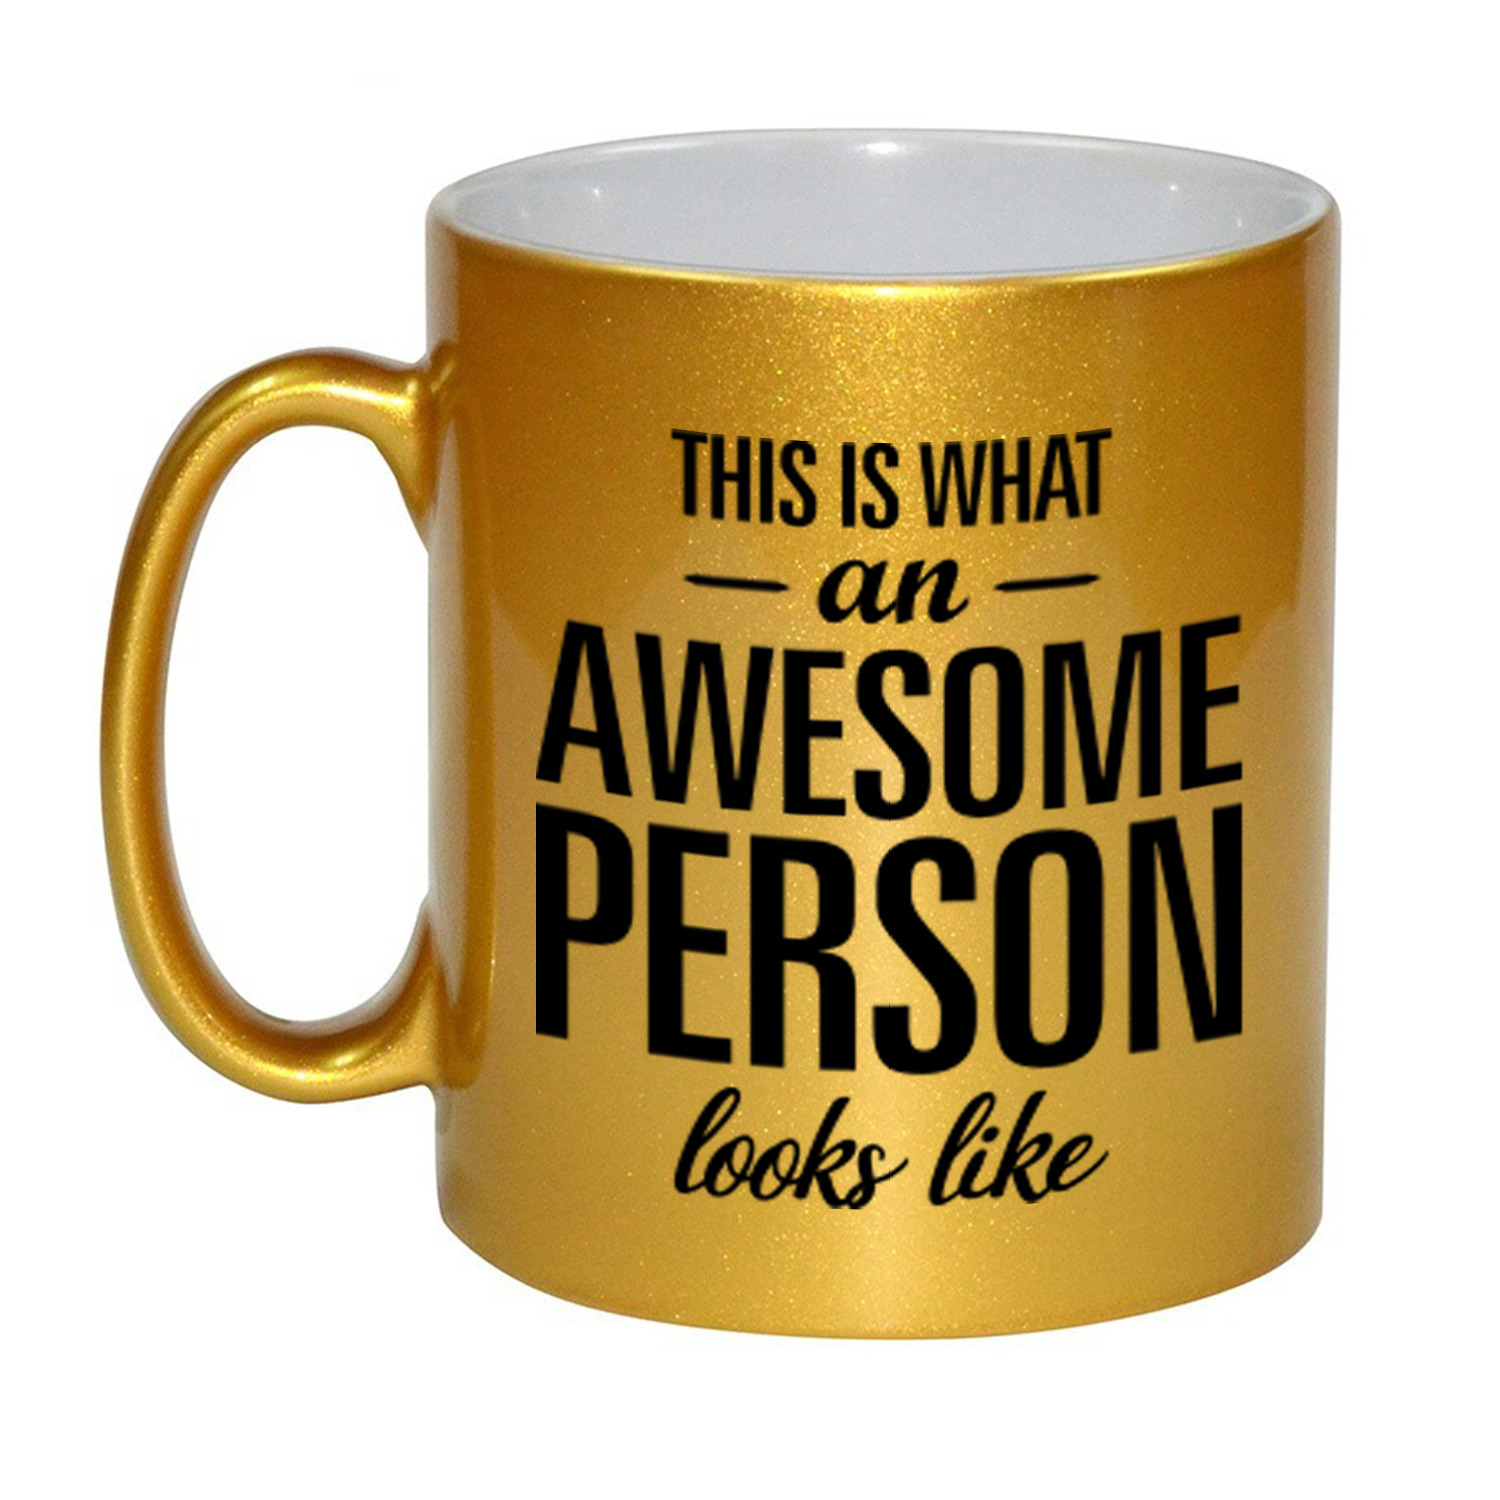 Awesome person / persoon gouden cadeau mok / beker 330 ml